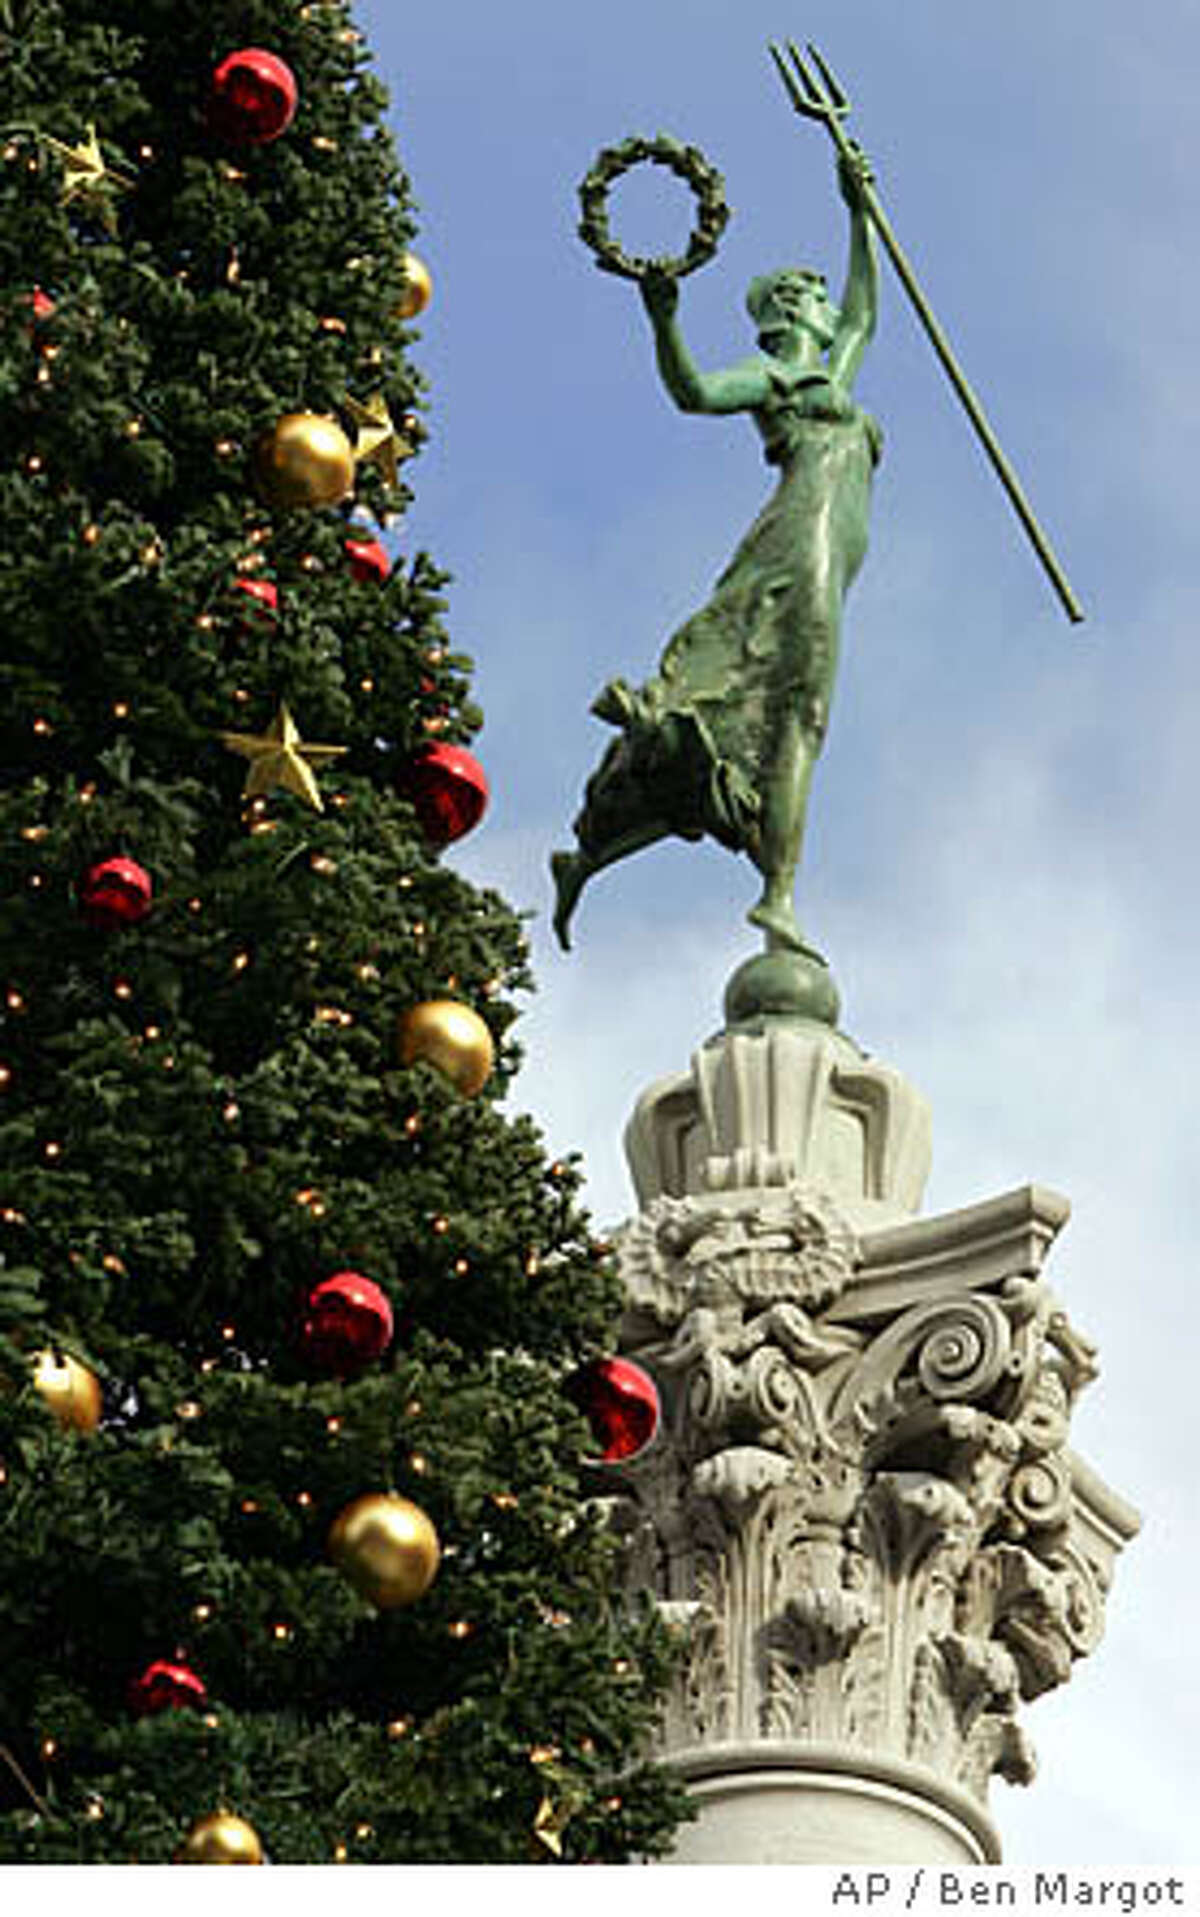 A decorated holiday tree is displayed in San Francisco's Union Square shopping district, Monday, Nov. 29, 2004, in San Francisco. (AP Photo/Ben Margot) Ran on: 12-05-2004 A decorated holiday tree is displayed in San Franciscos Union Square.